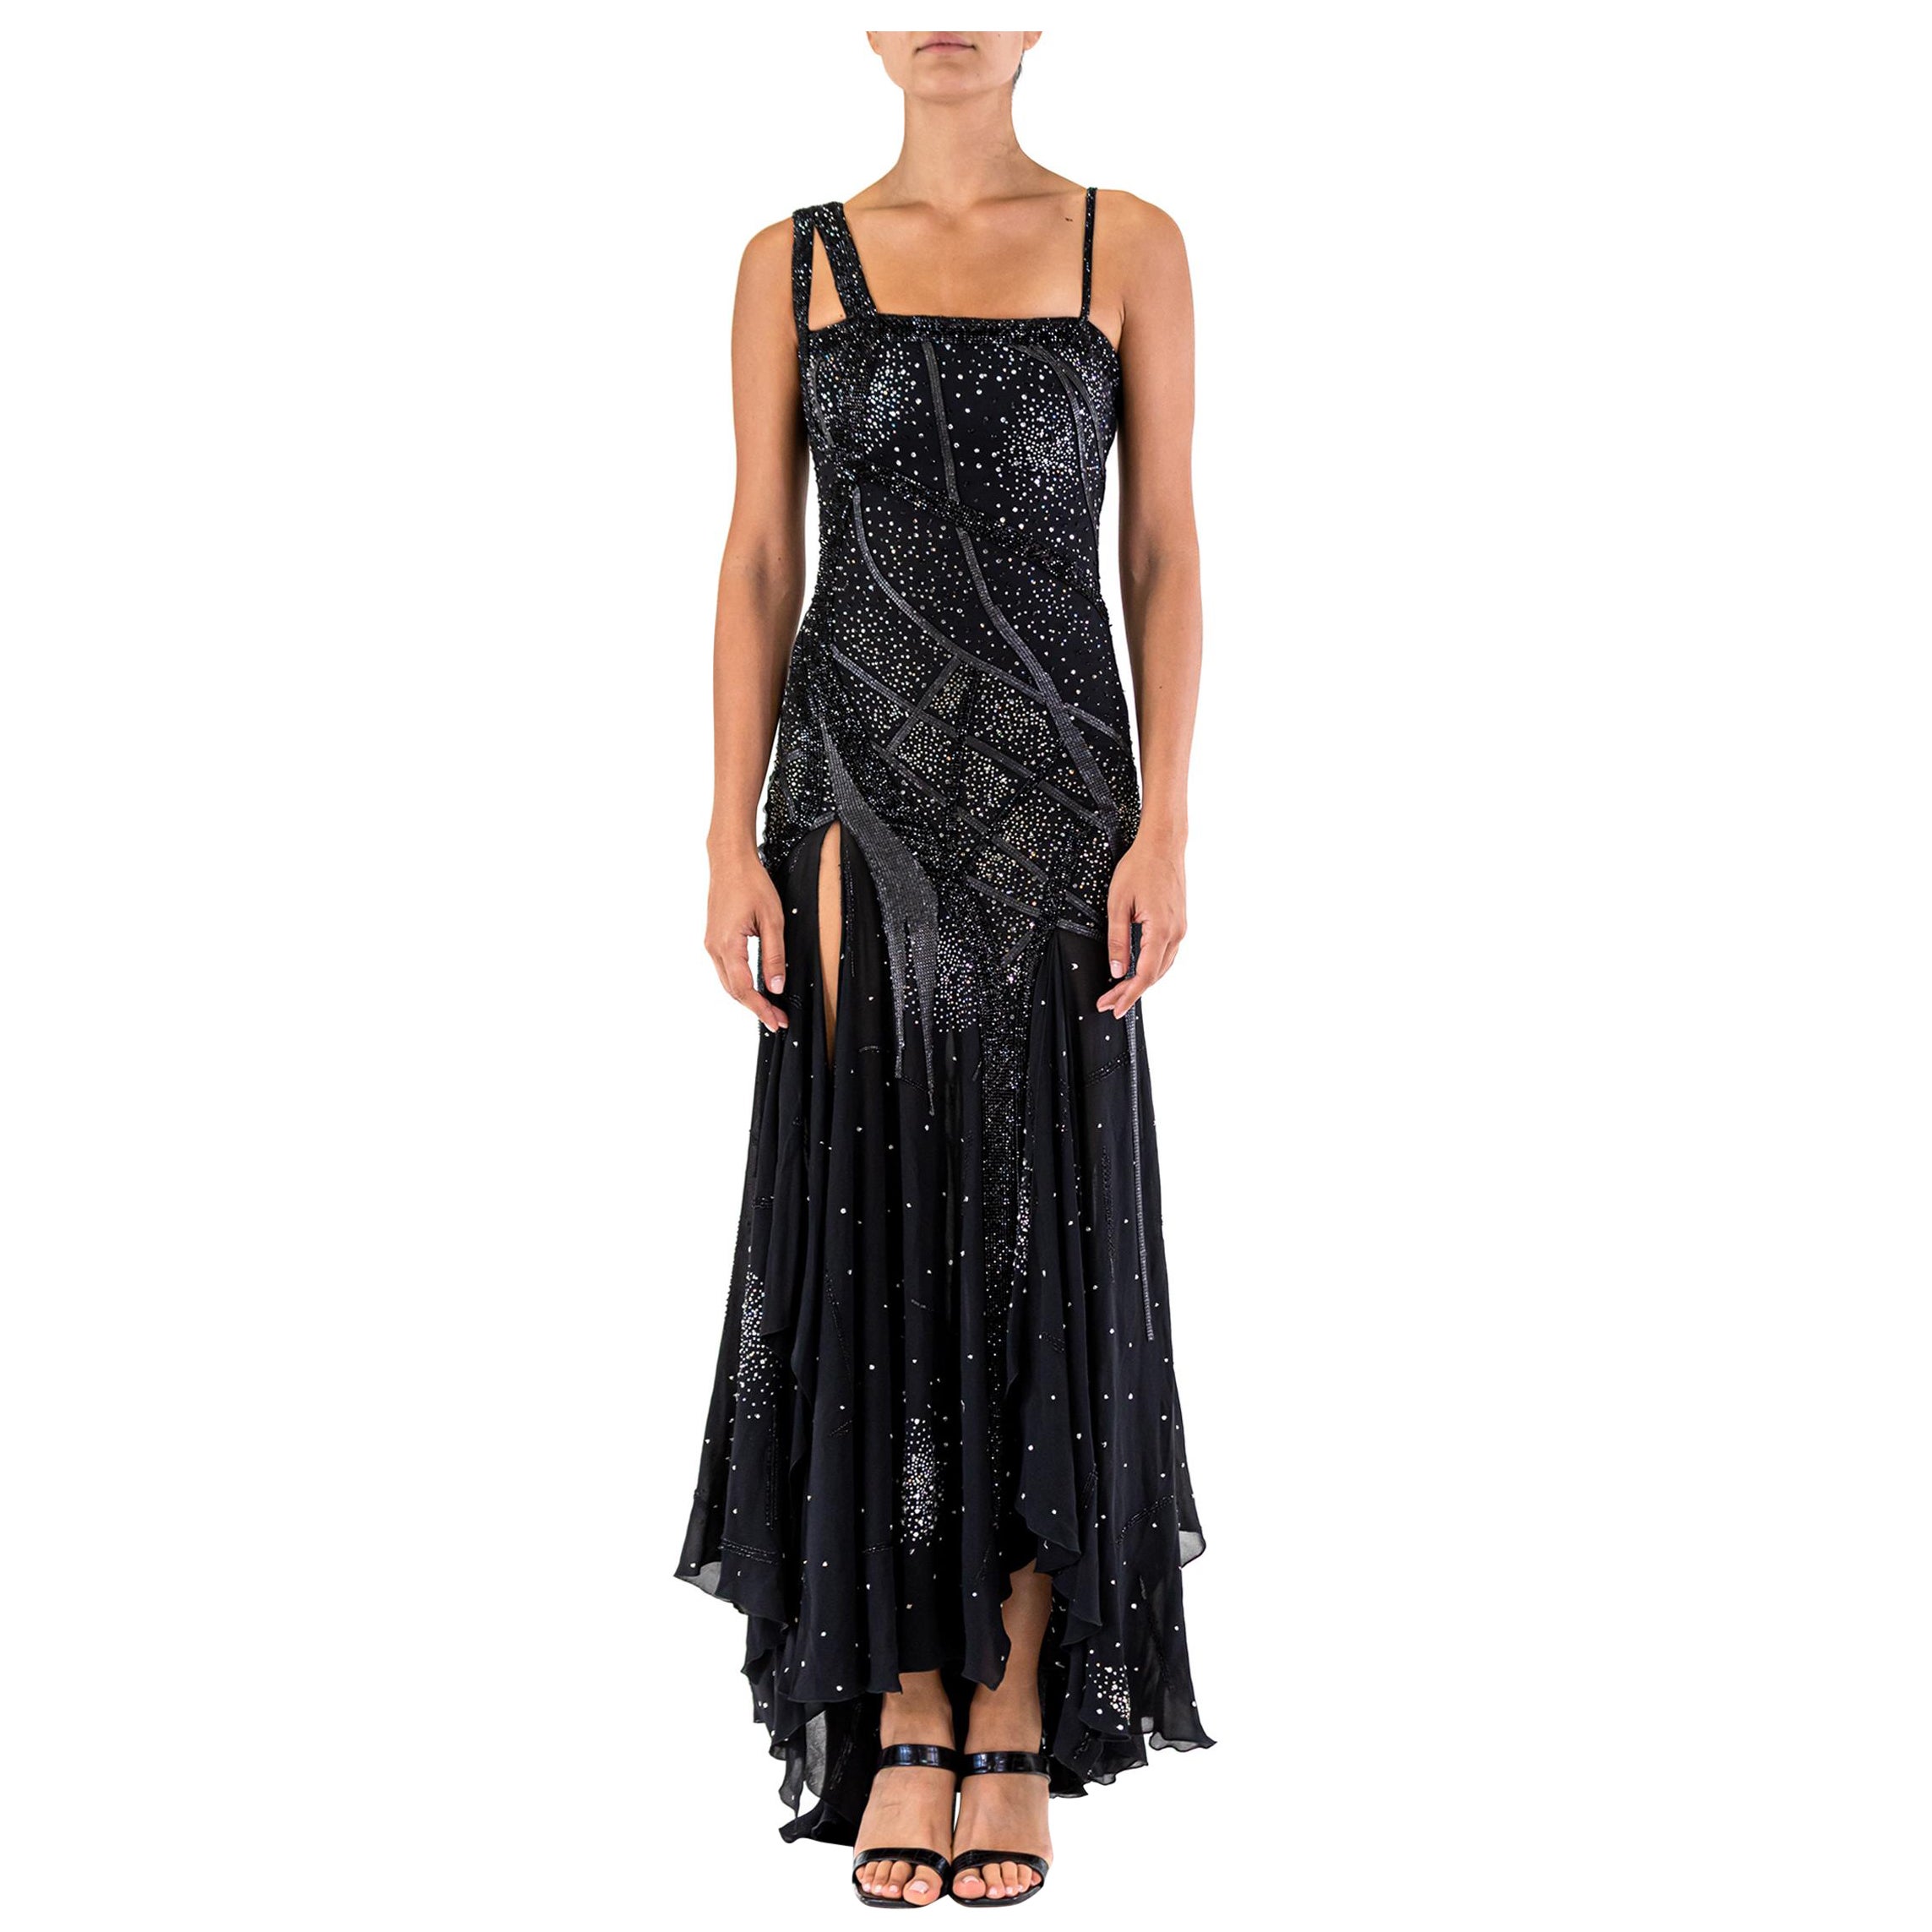 2000S ATELIER VERSACE GIANNI Black Silk Chiffon Haute Couture Crystal Beaded  G For Sale